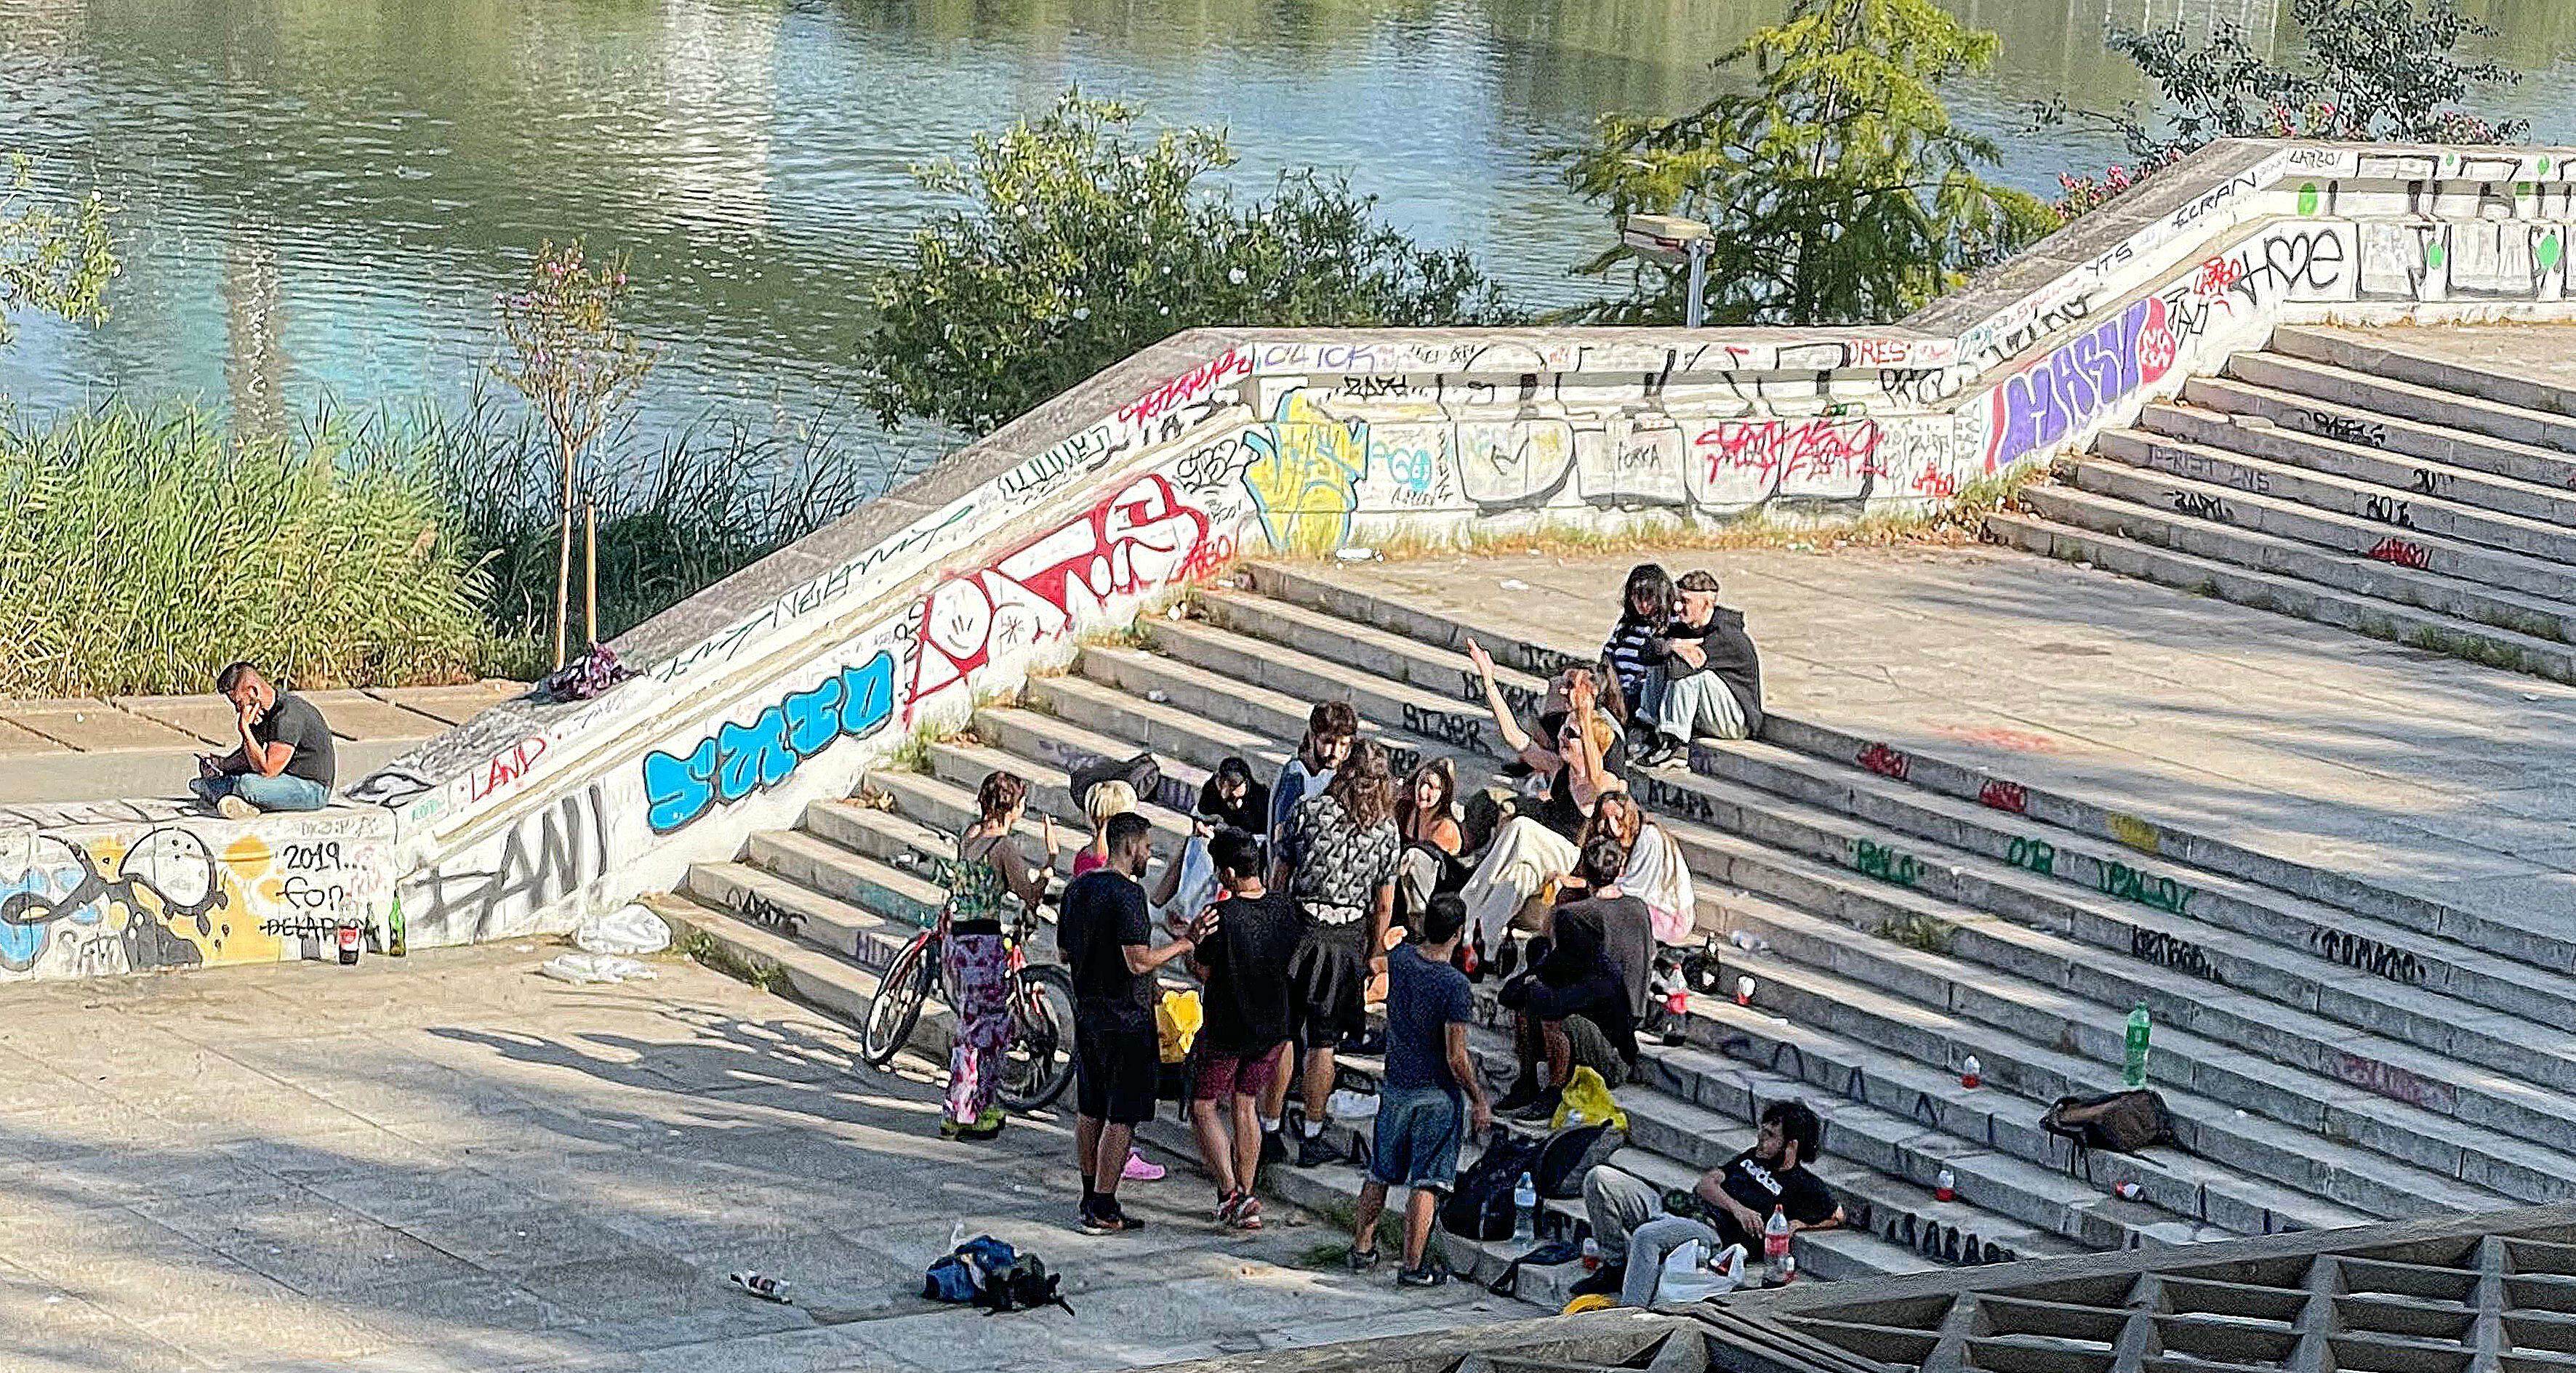 An outdoor drinking party by the Guadalquivir river.